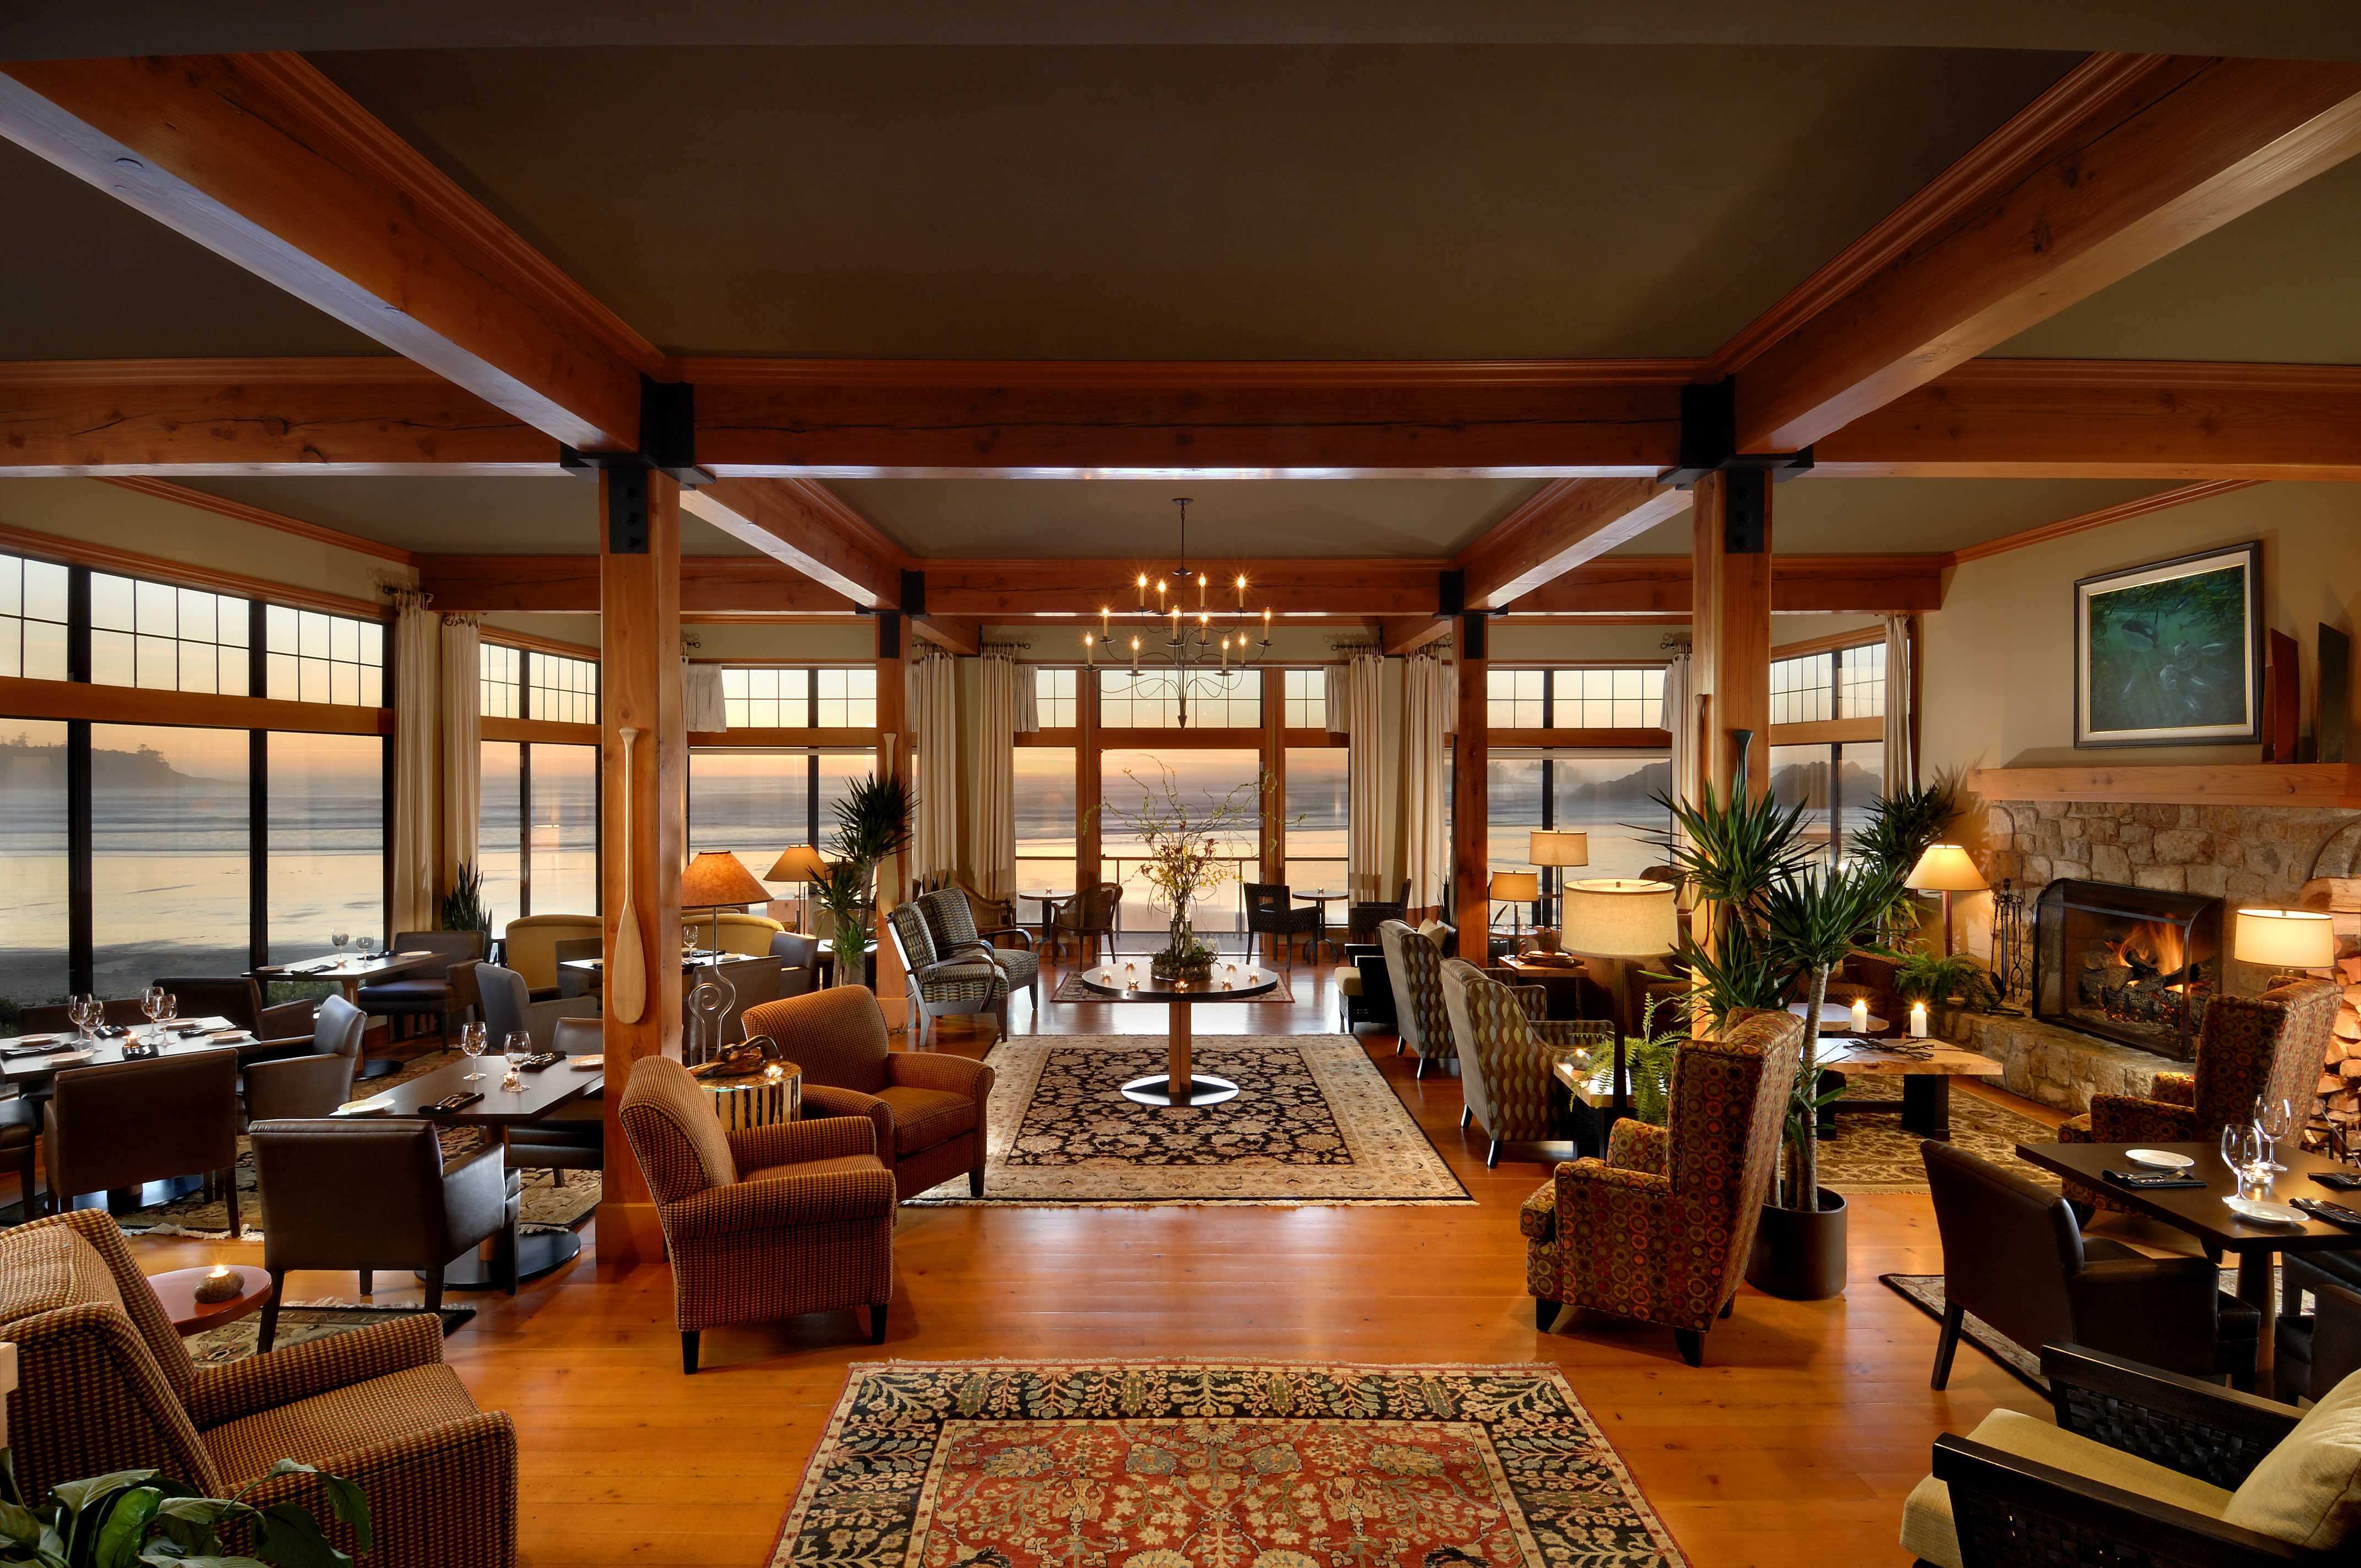 inside dining and great room at long beach lodge resort in tofino